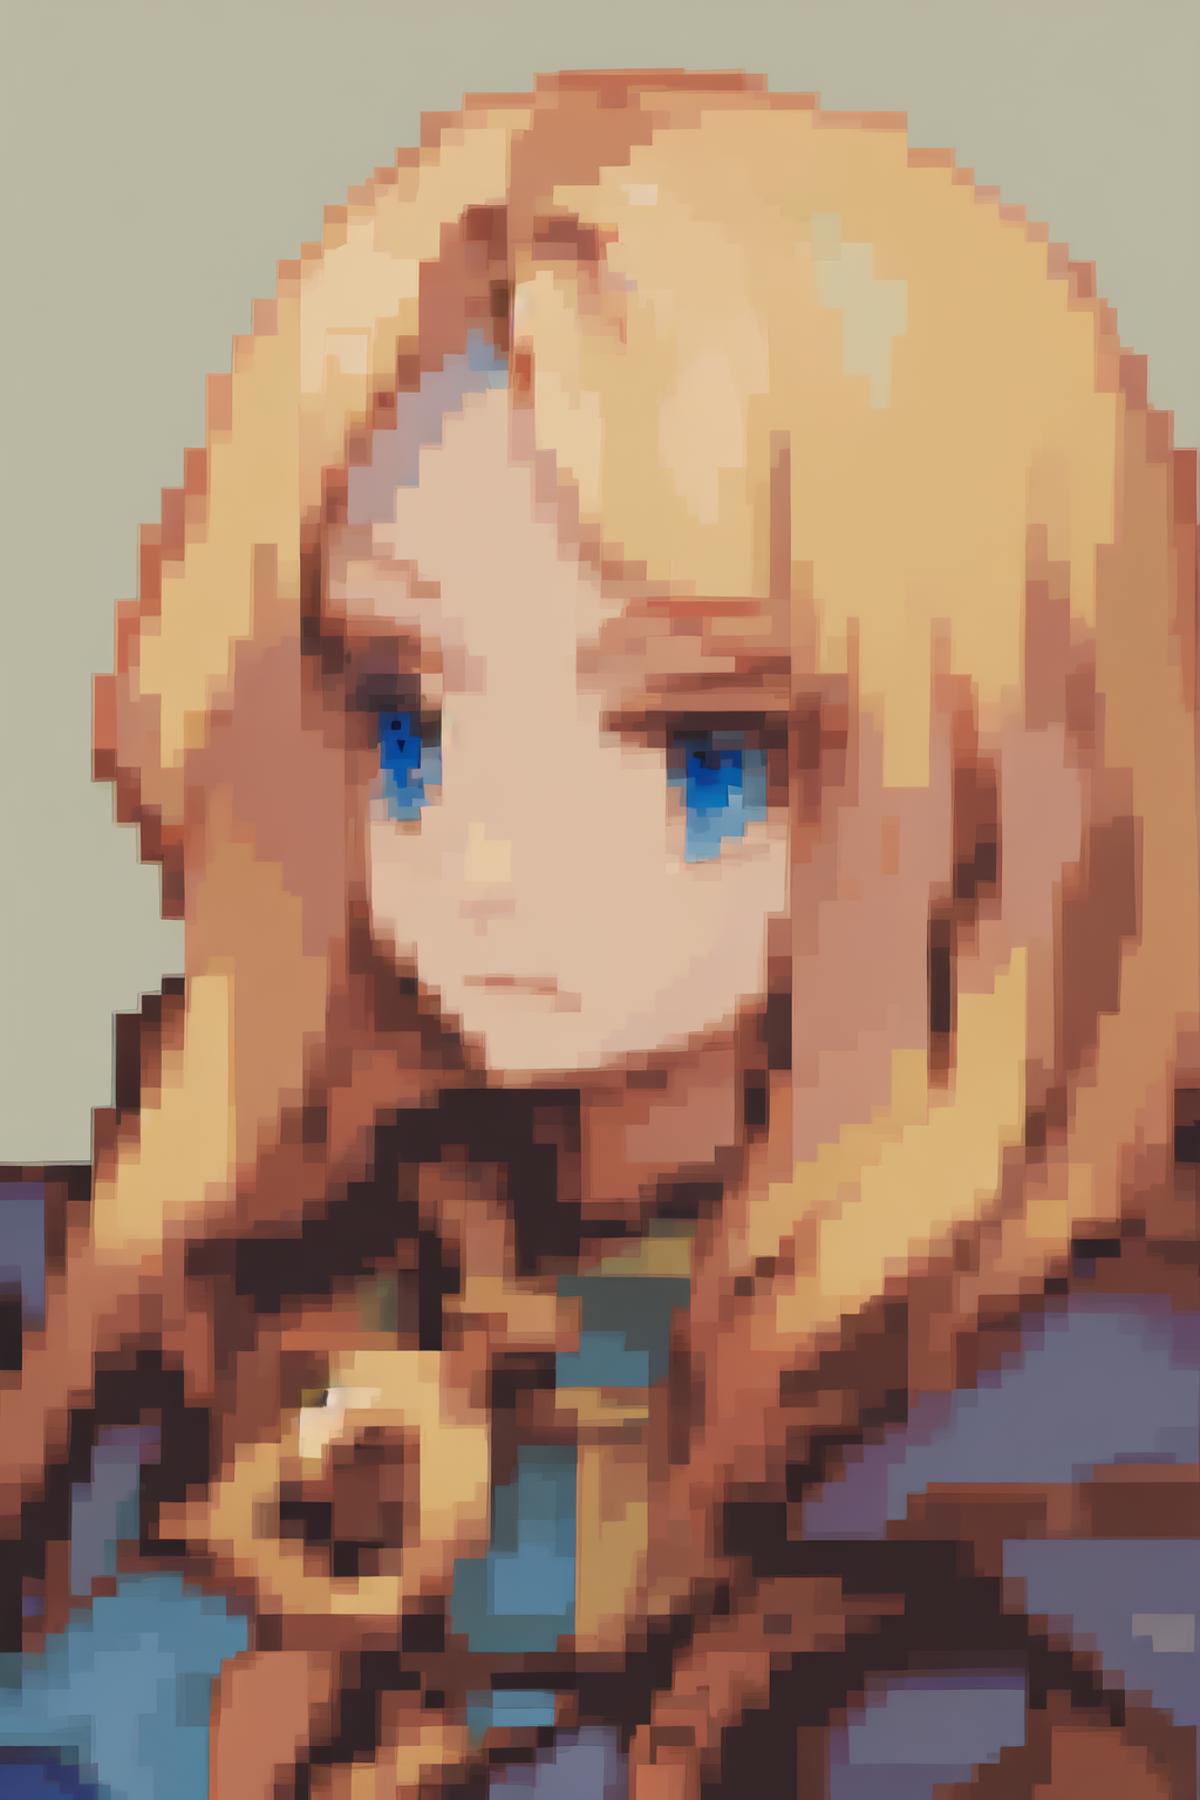 Final Fantasy Tactics Portrait Style image by mfcg